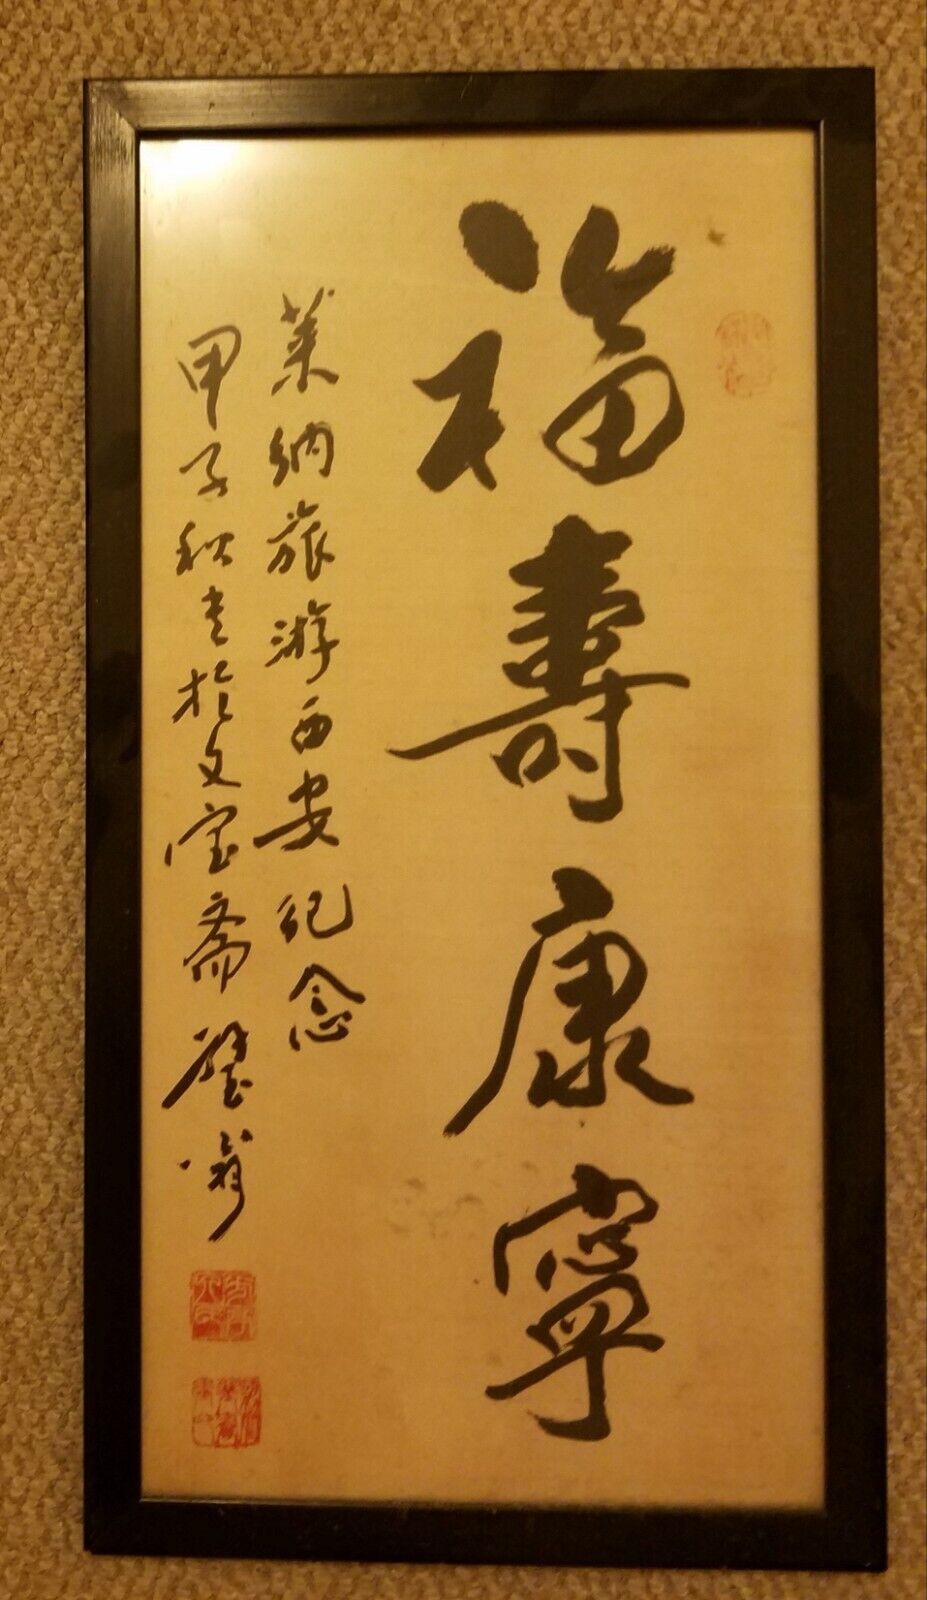 A Framed Chinese Caligraphy - Happiness Longevity Health Peace